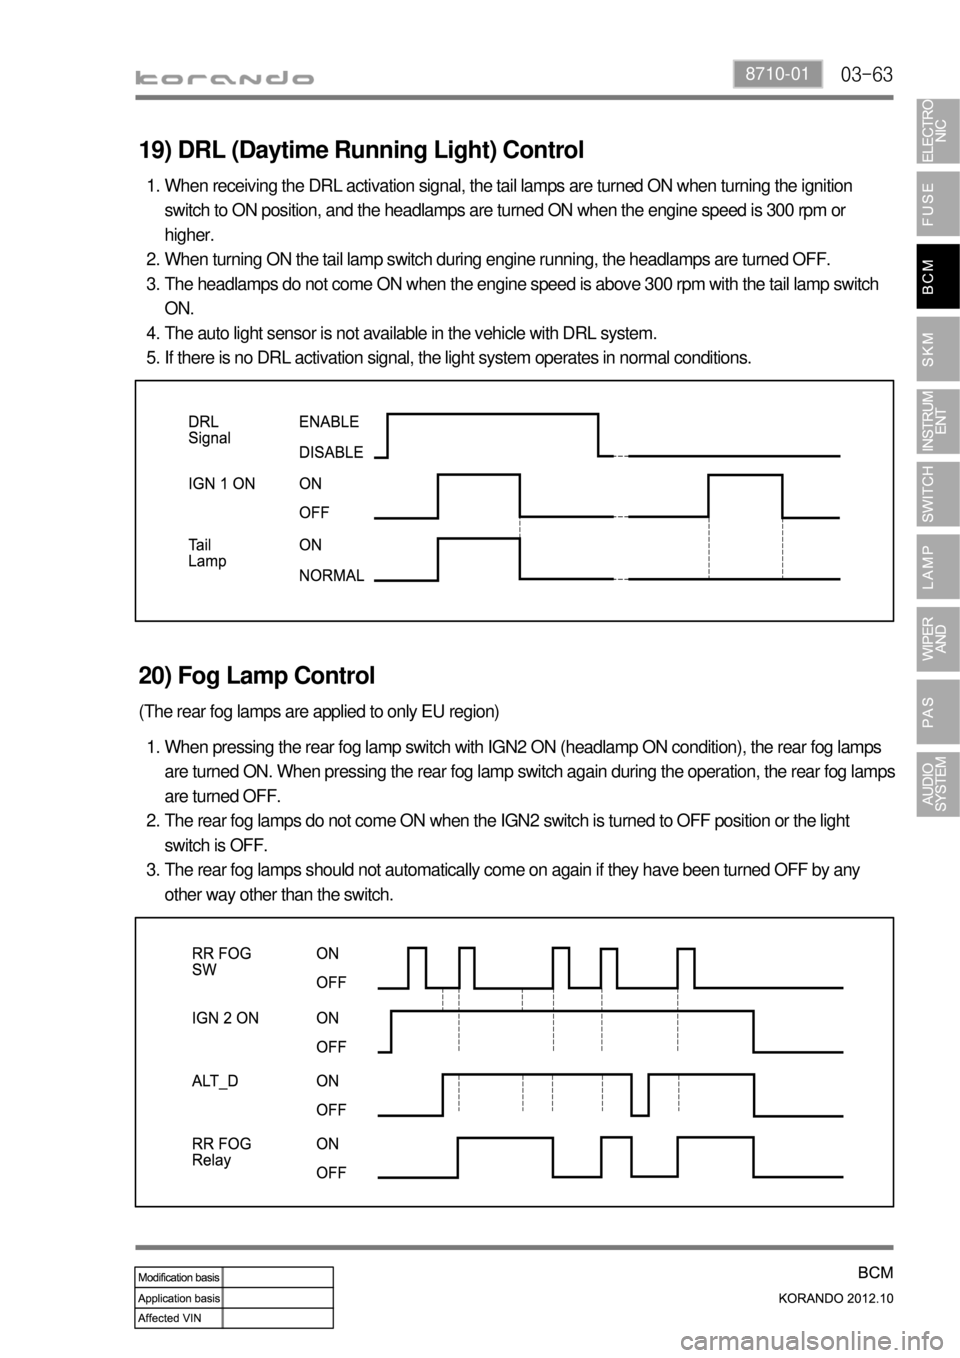 SSANGYONG KORANDO 2012  Service Manual 03-638710-01
19) DRL (Daytime Running Light) Control
When receiving the DRL activation signal, the tail lamps are turned ON when turning the ignition 
switch to ON position, and the headlamps are turn